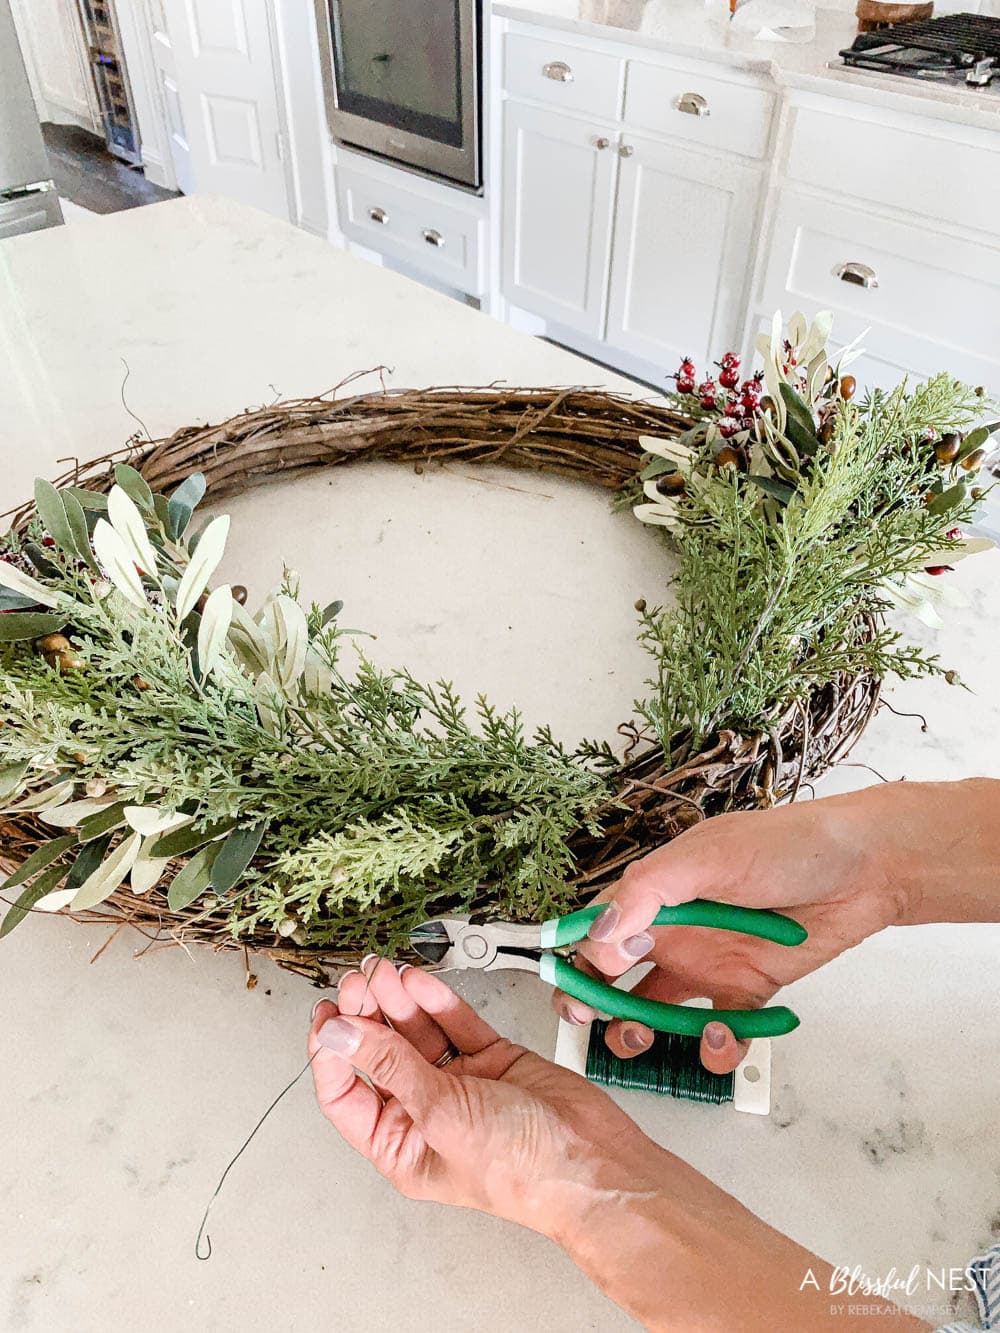 Step-by-step instructions to making this simple Christmas grapevine wreath for the holidays. #ABlissfulNest #HobbyLobby #sponsor #Christmaswreath